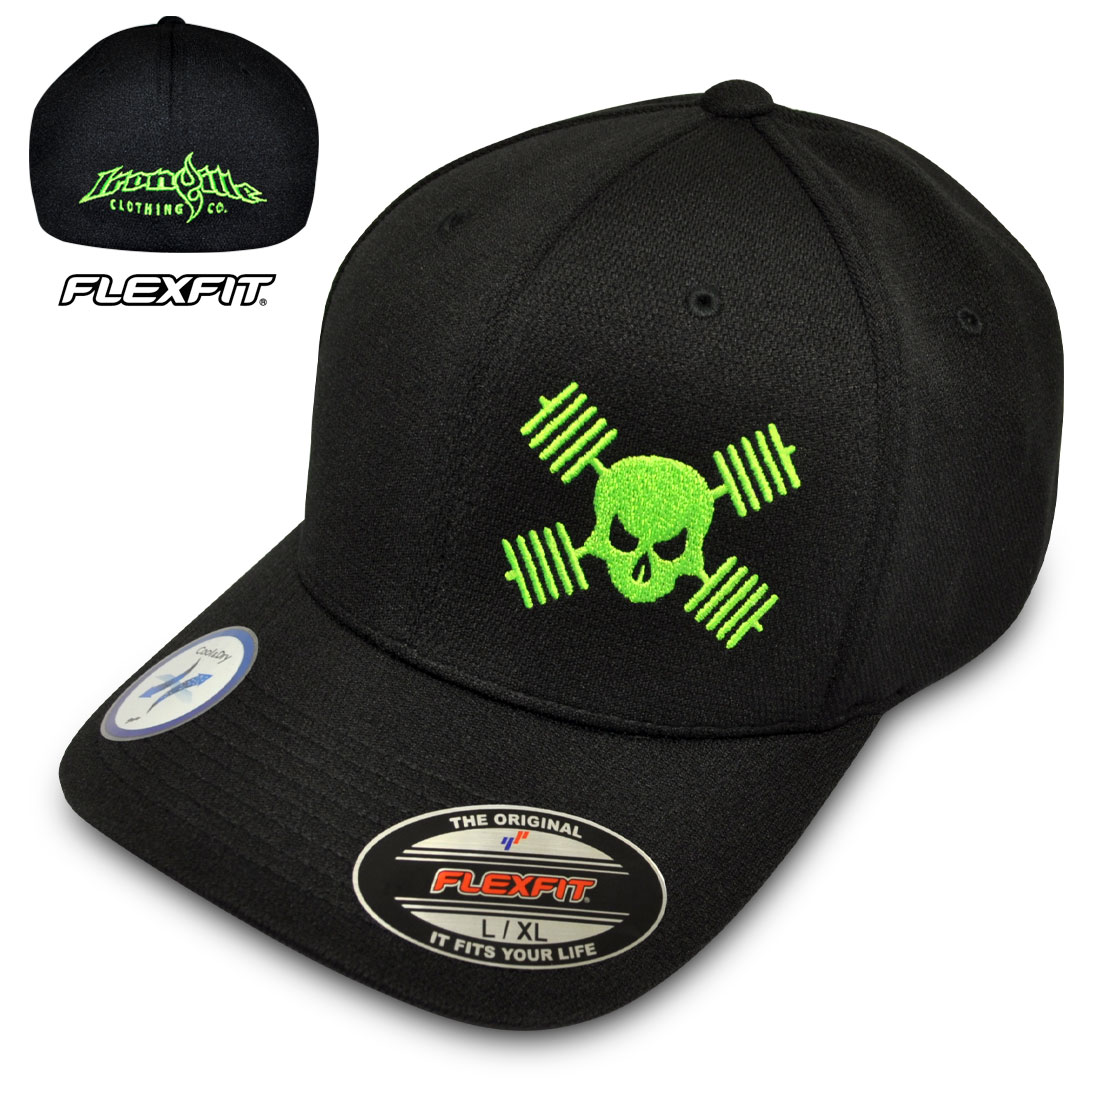 https://www.ironville.com/wp-content/uploads/2016/06/skull-and-barbells-hat-flexfit-cool-dry-bodybuilding-powerlifting-weightlifting-black-with-neon-green.jpg